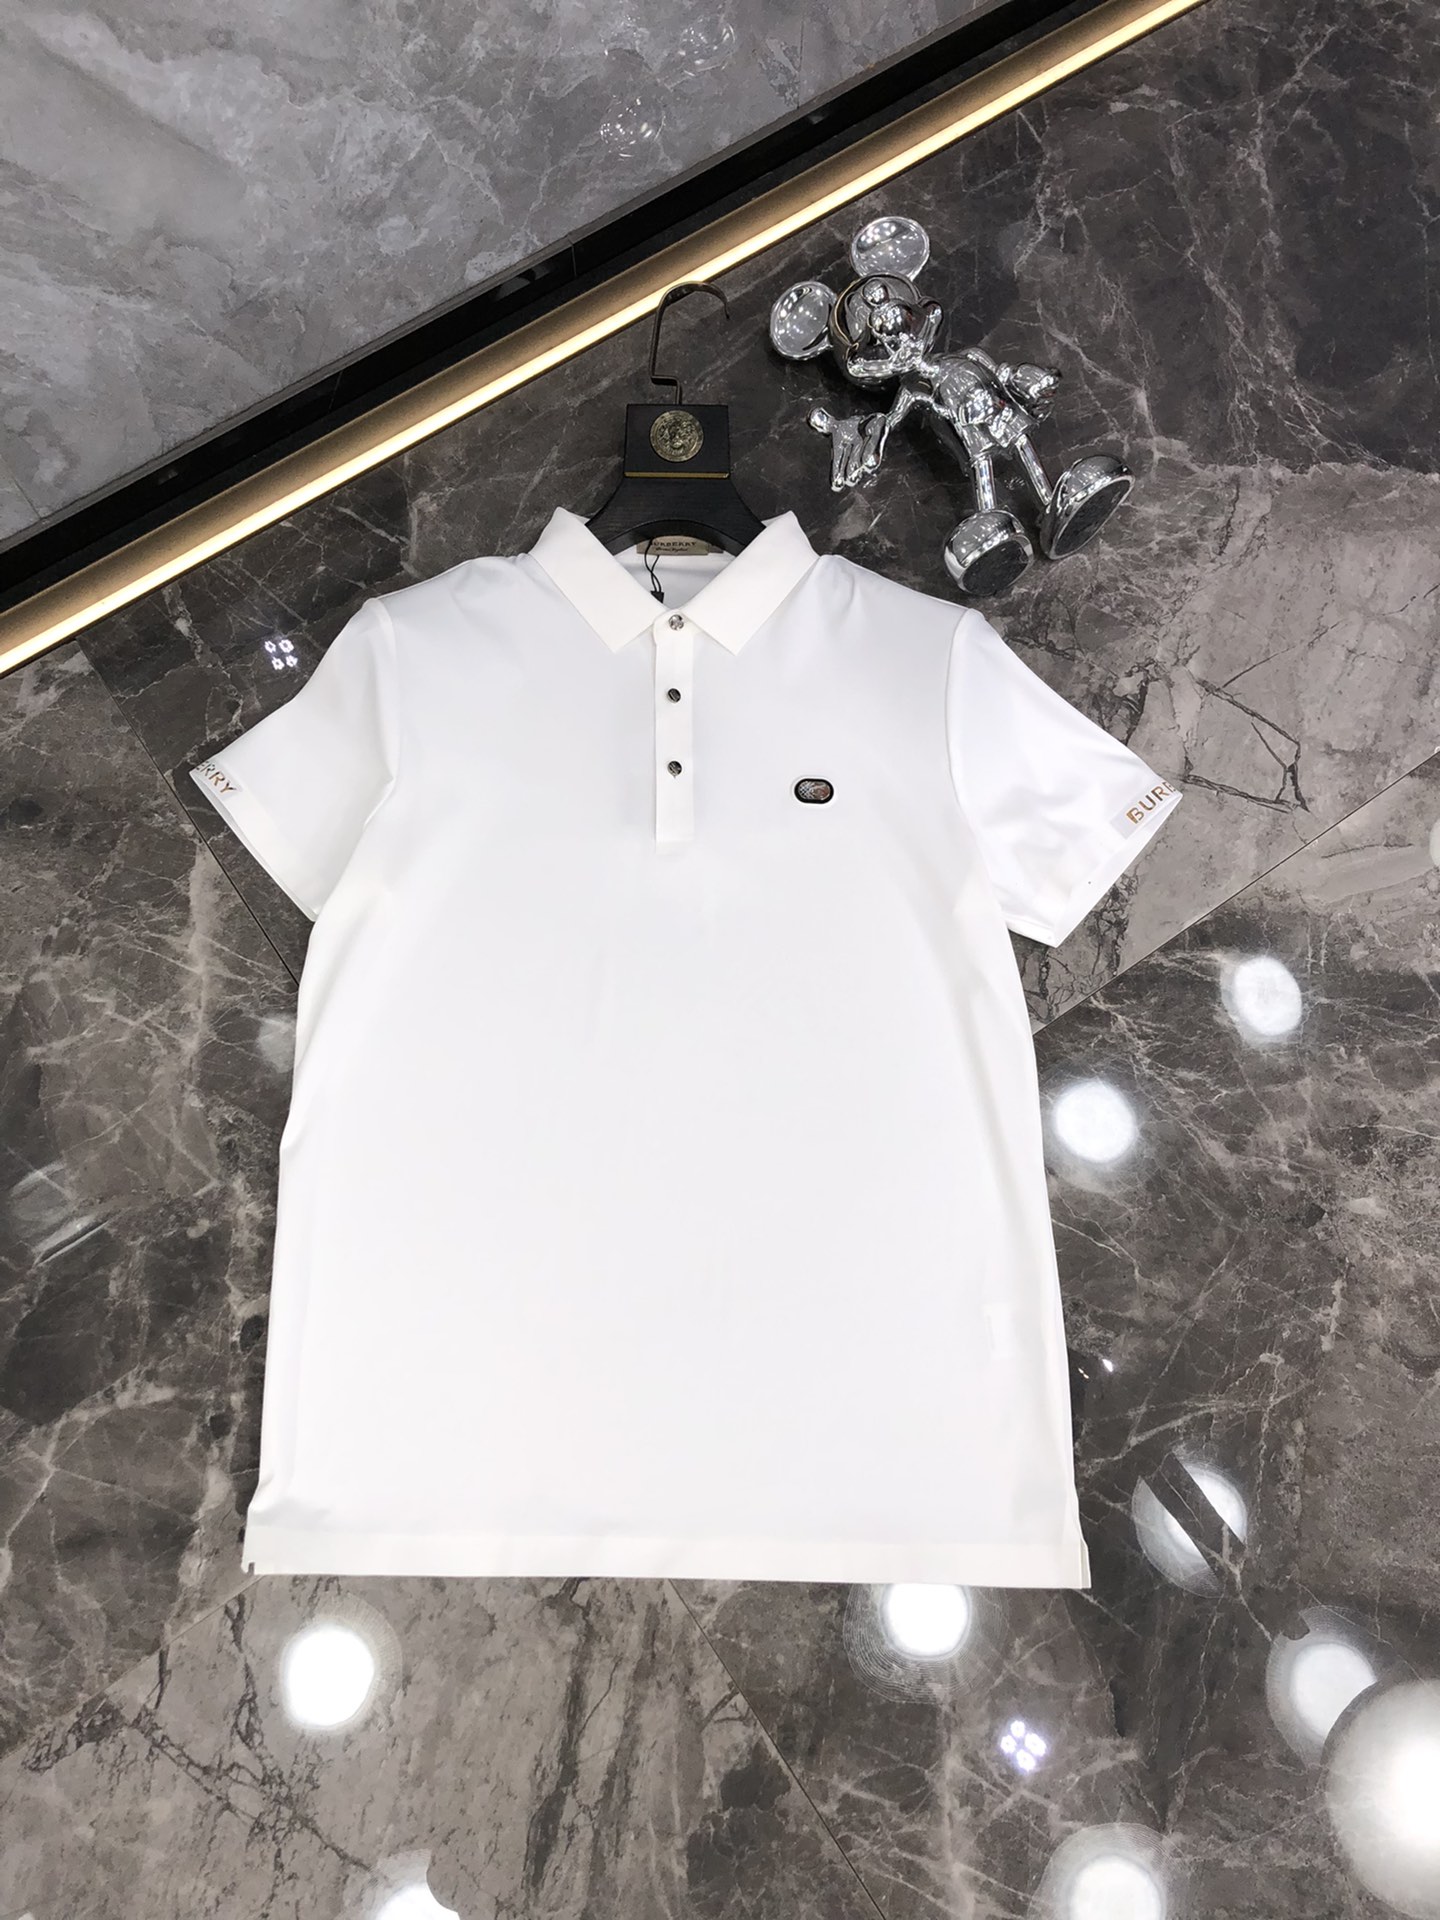 Burberry Clothing Polo T-Shirt White Summer Collection Short Sleeve